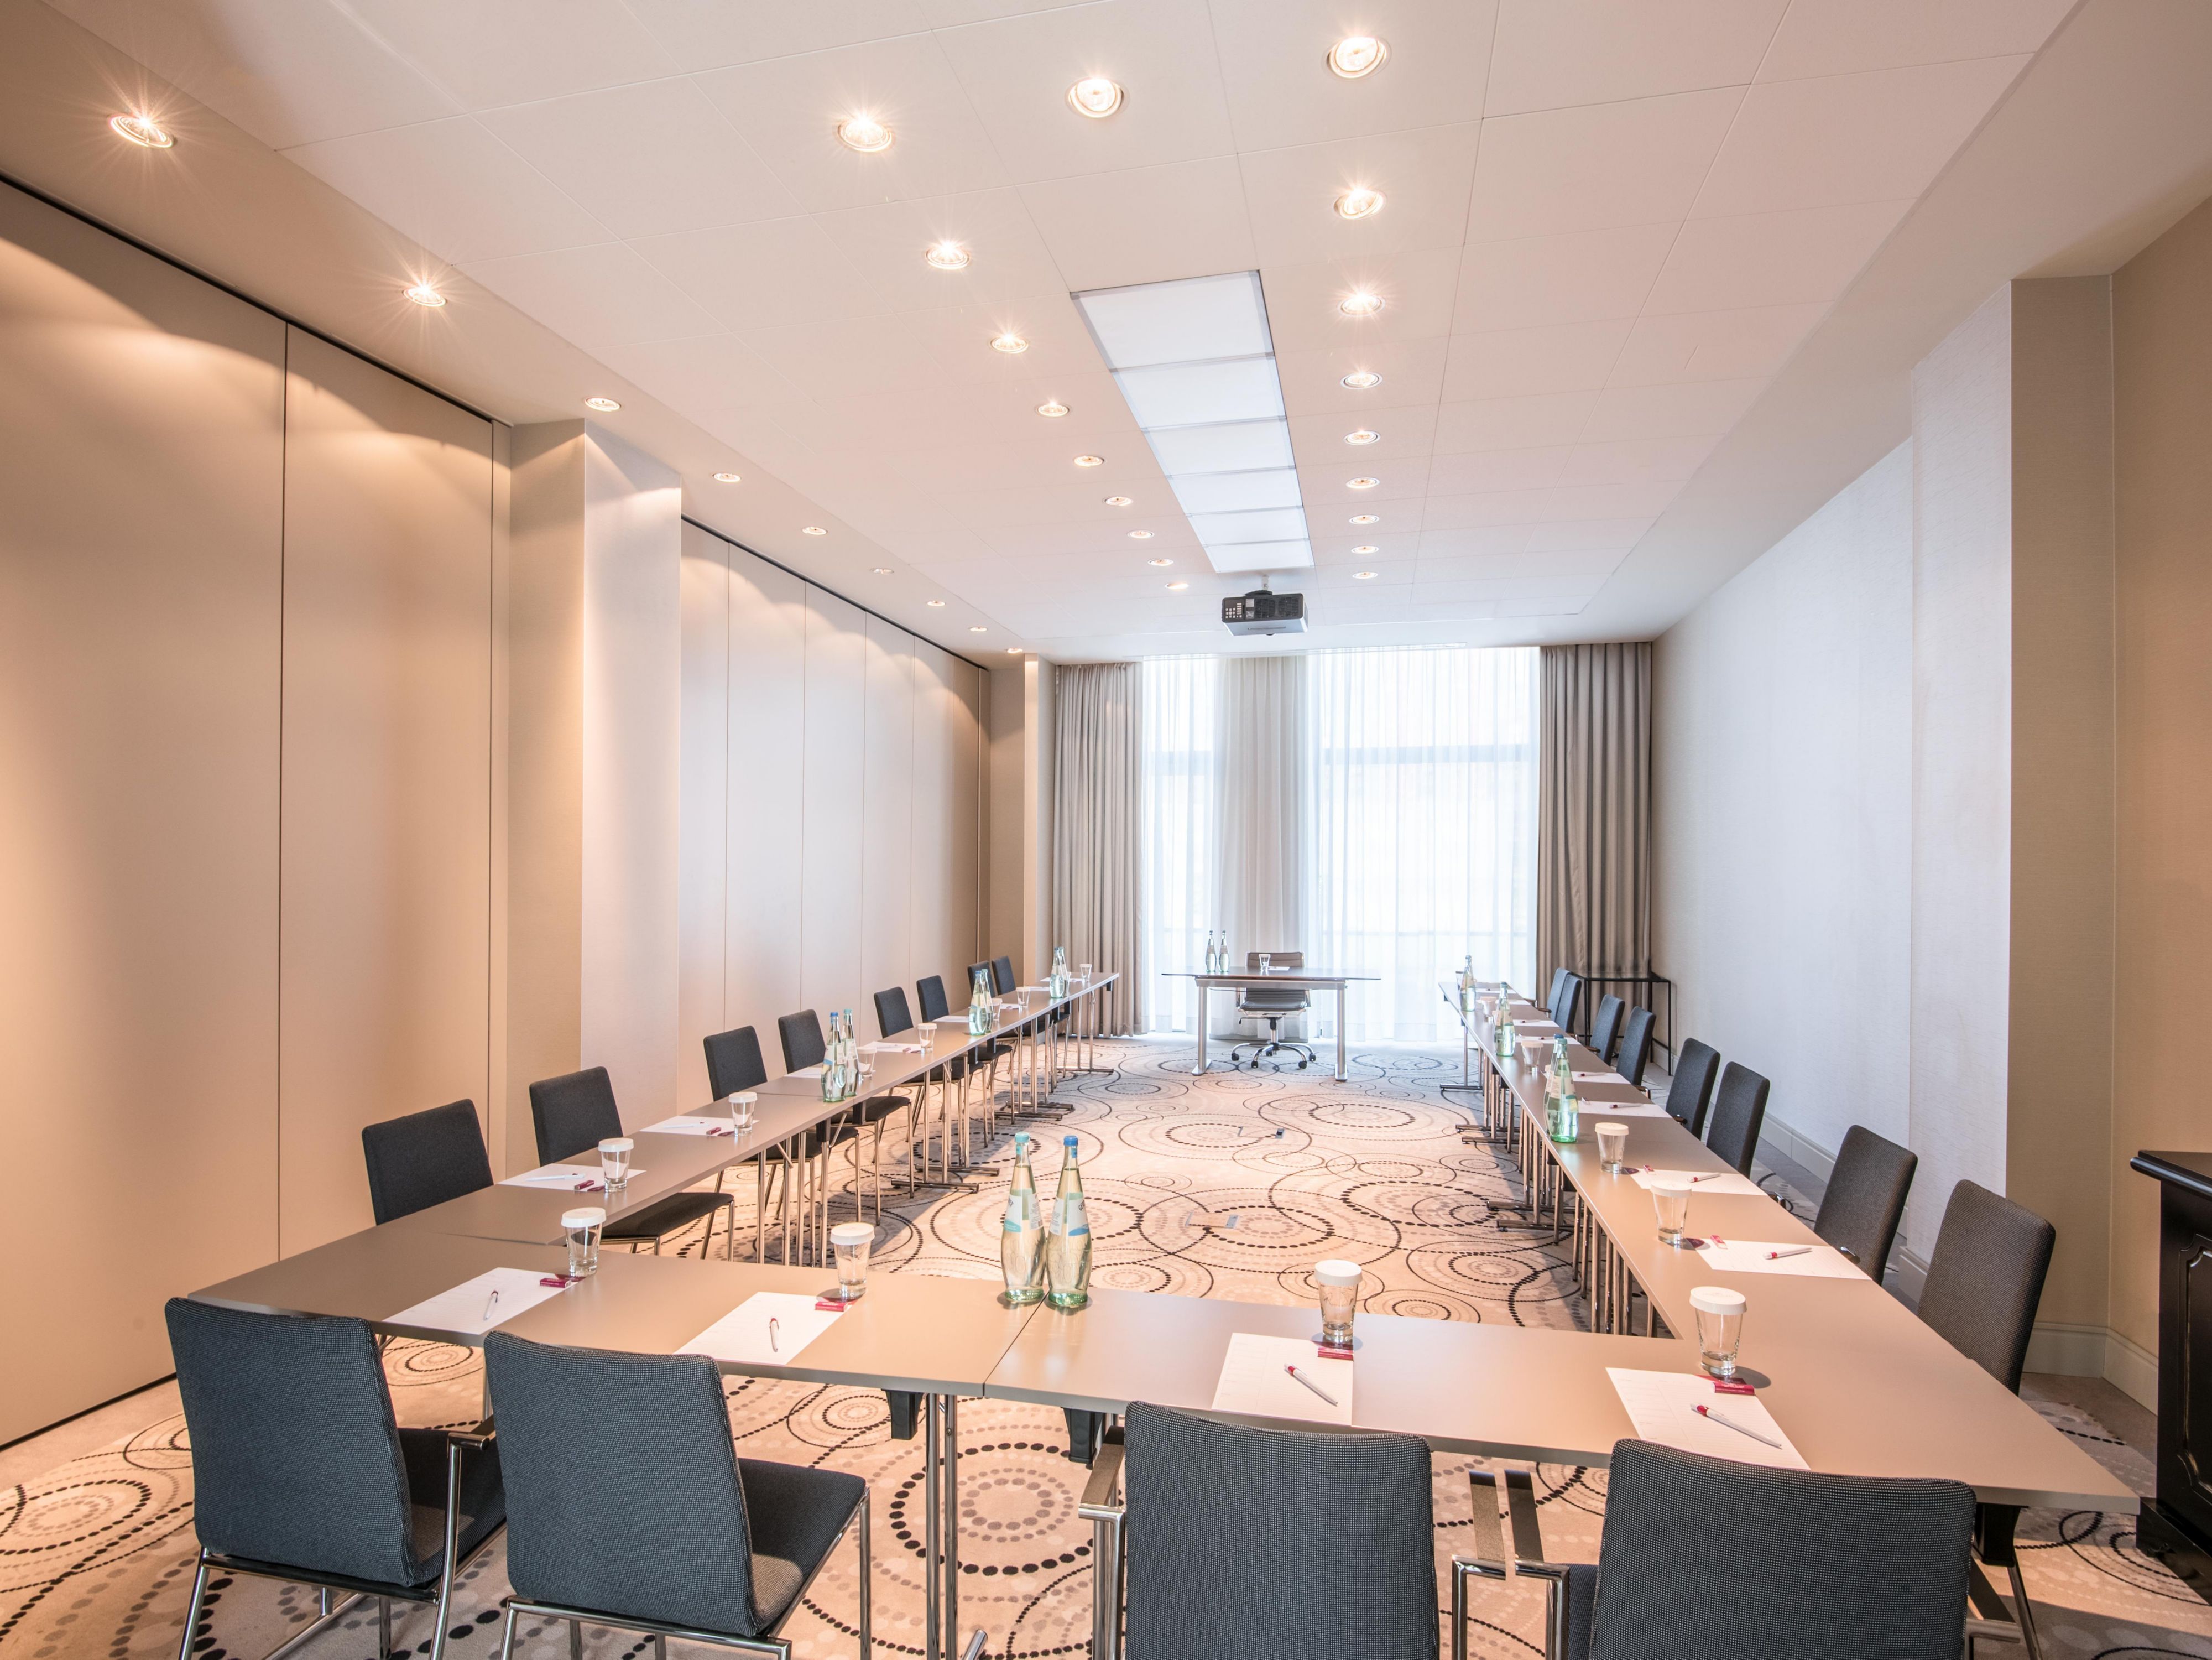 Our eight versatile function spaces feature the latest audiovisual technology and cater for everything from small meetings to large-scale receptions for up to 250 guests. Our Crowne Plaza Meetings Director can handle all your event details.